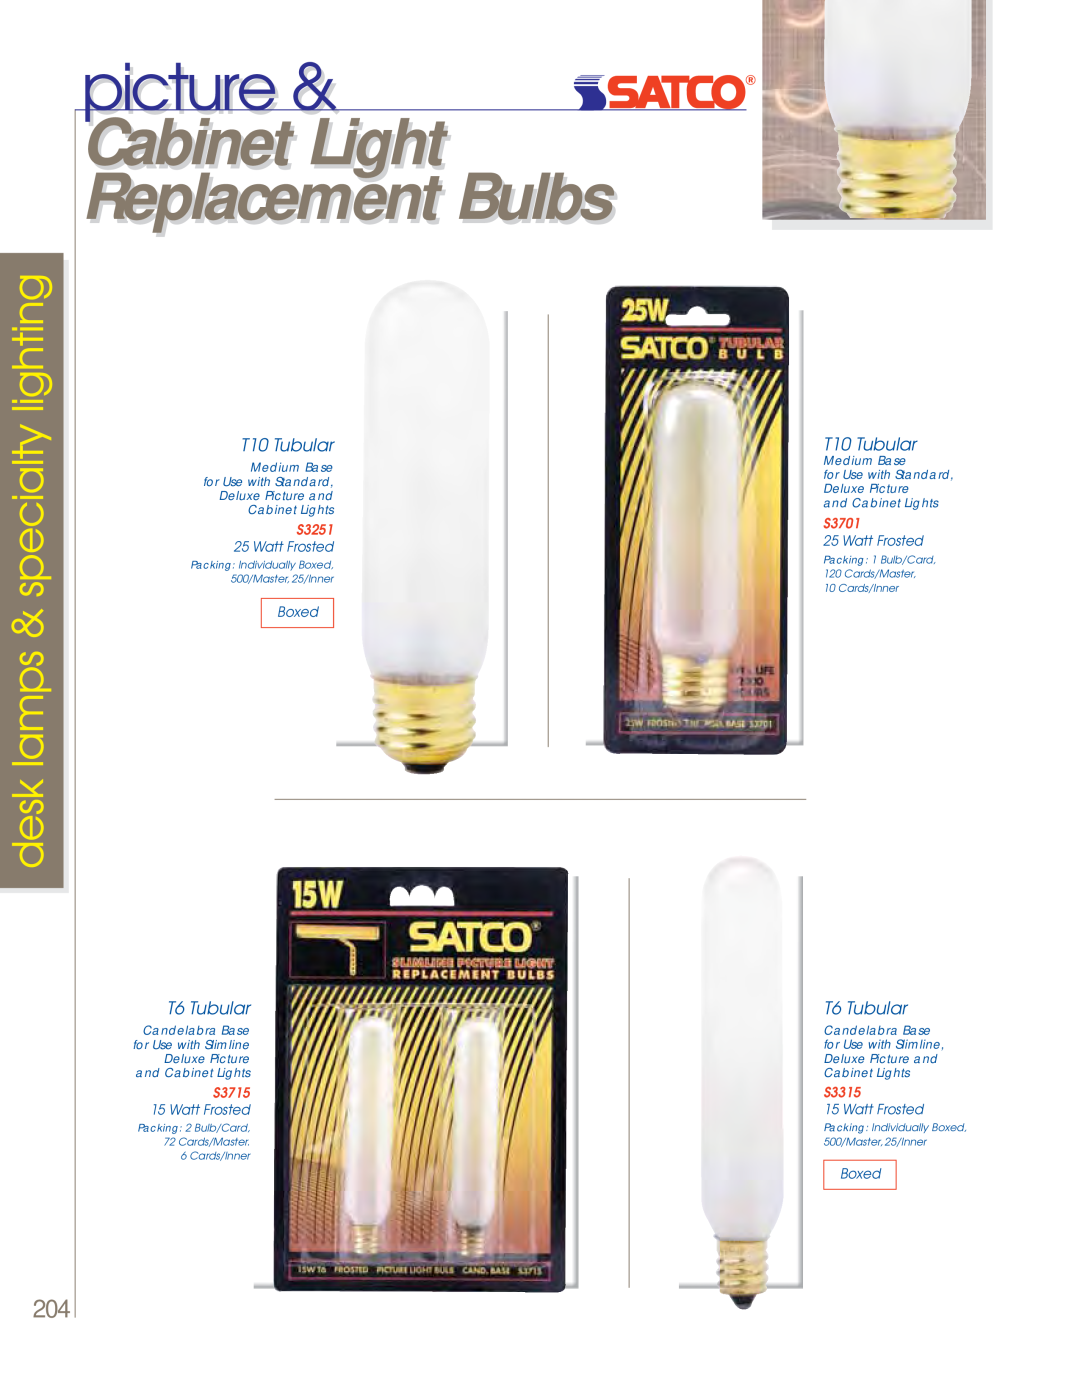 Satco Products 60-802 picture, Cabinet Light Replacement Bulbs, desk lamps & specialty lighting, T10 Tubular, T6 Tubular 